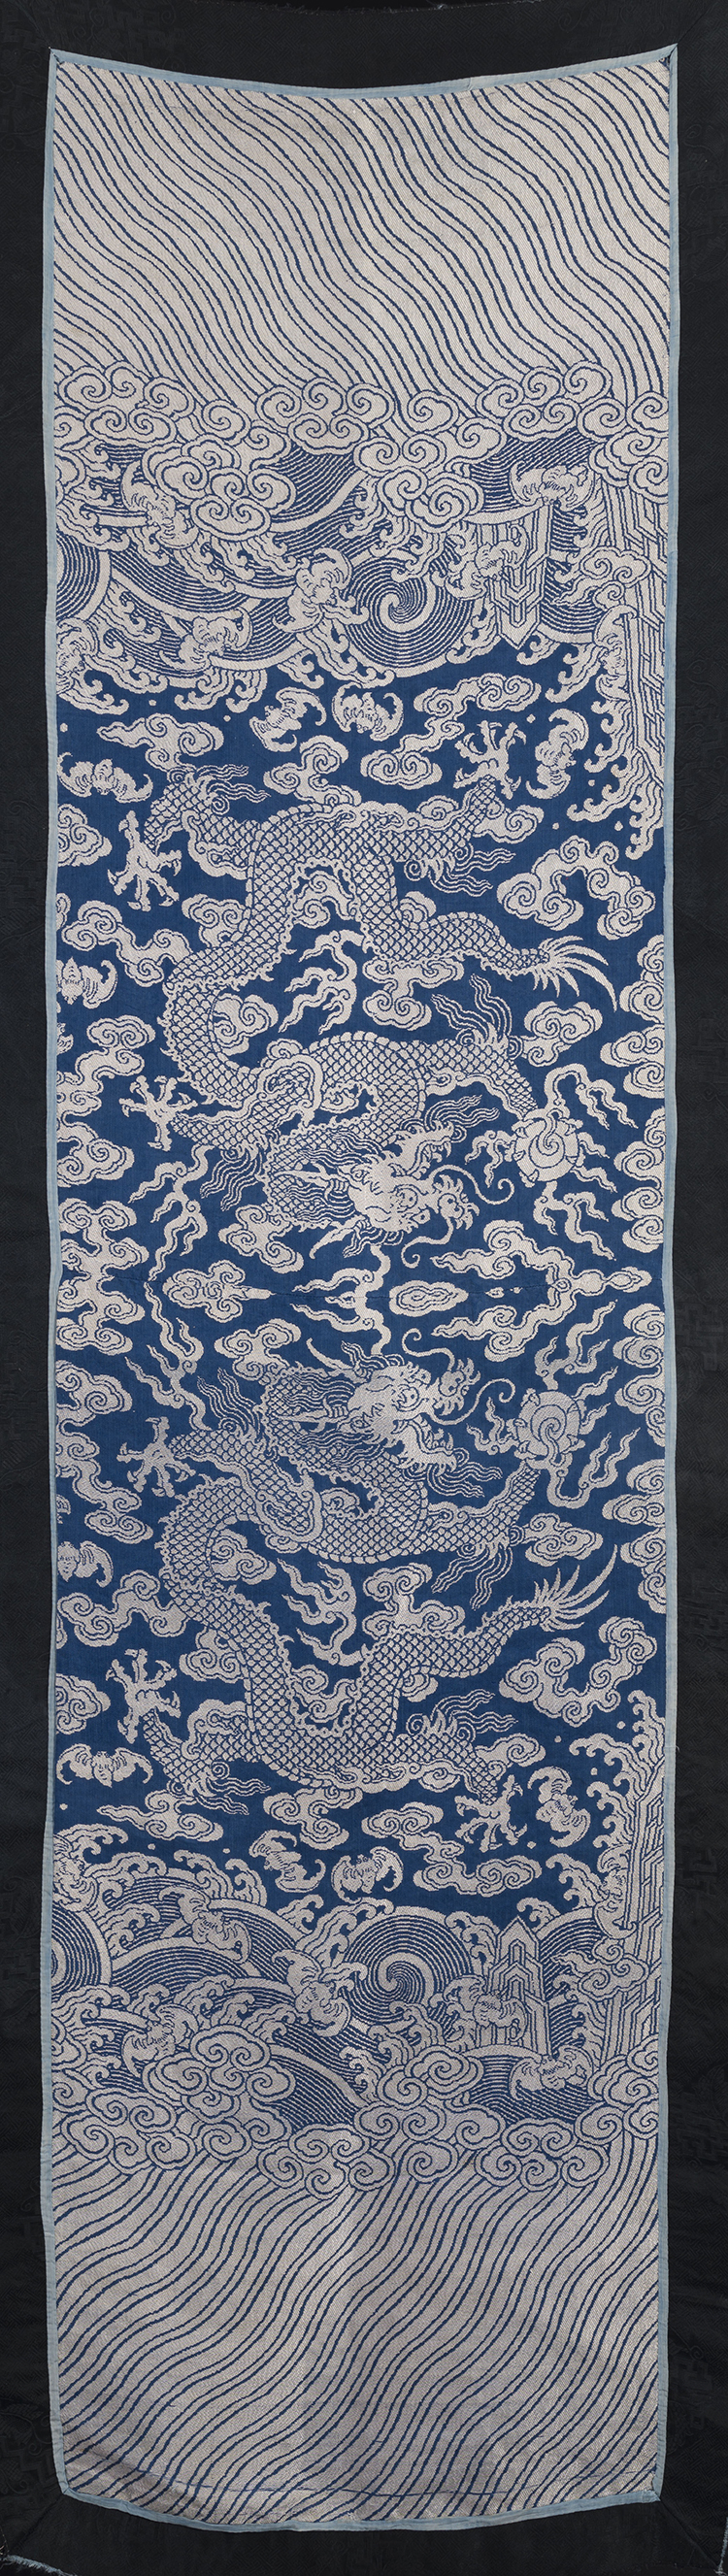 Two Chinese Silk Dragon Textiles, 19th Century par  Chinese Art